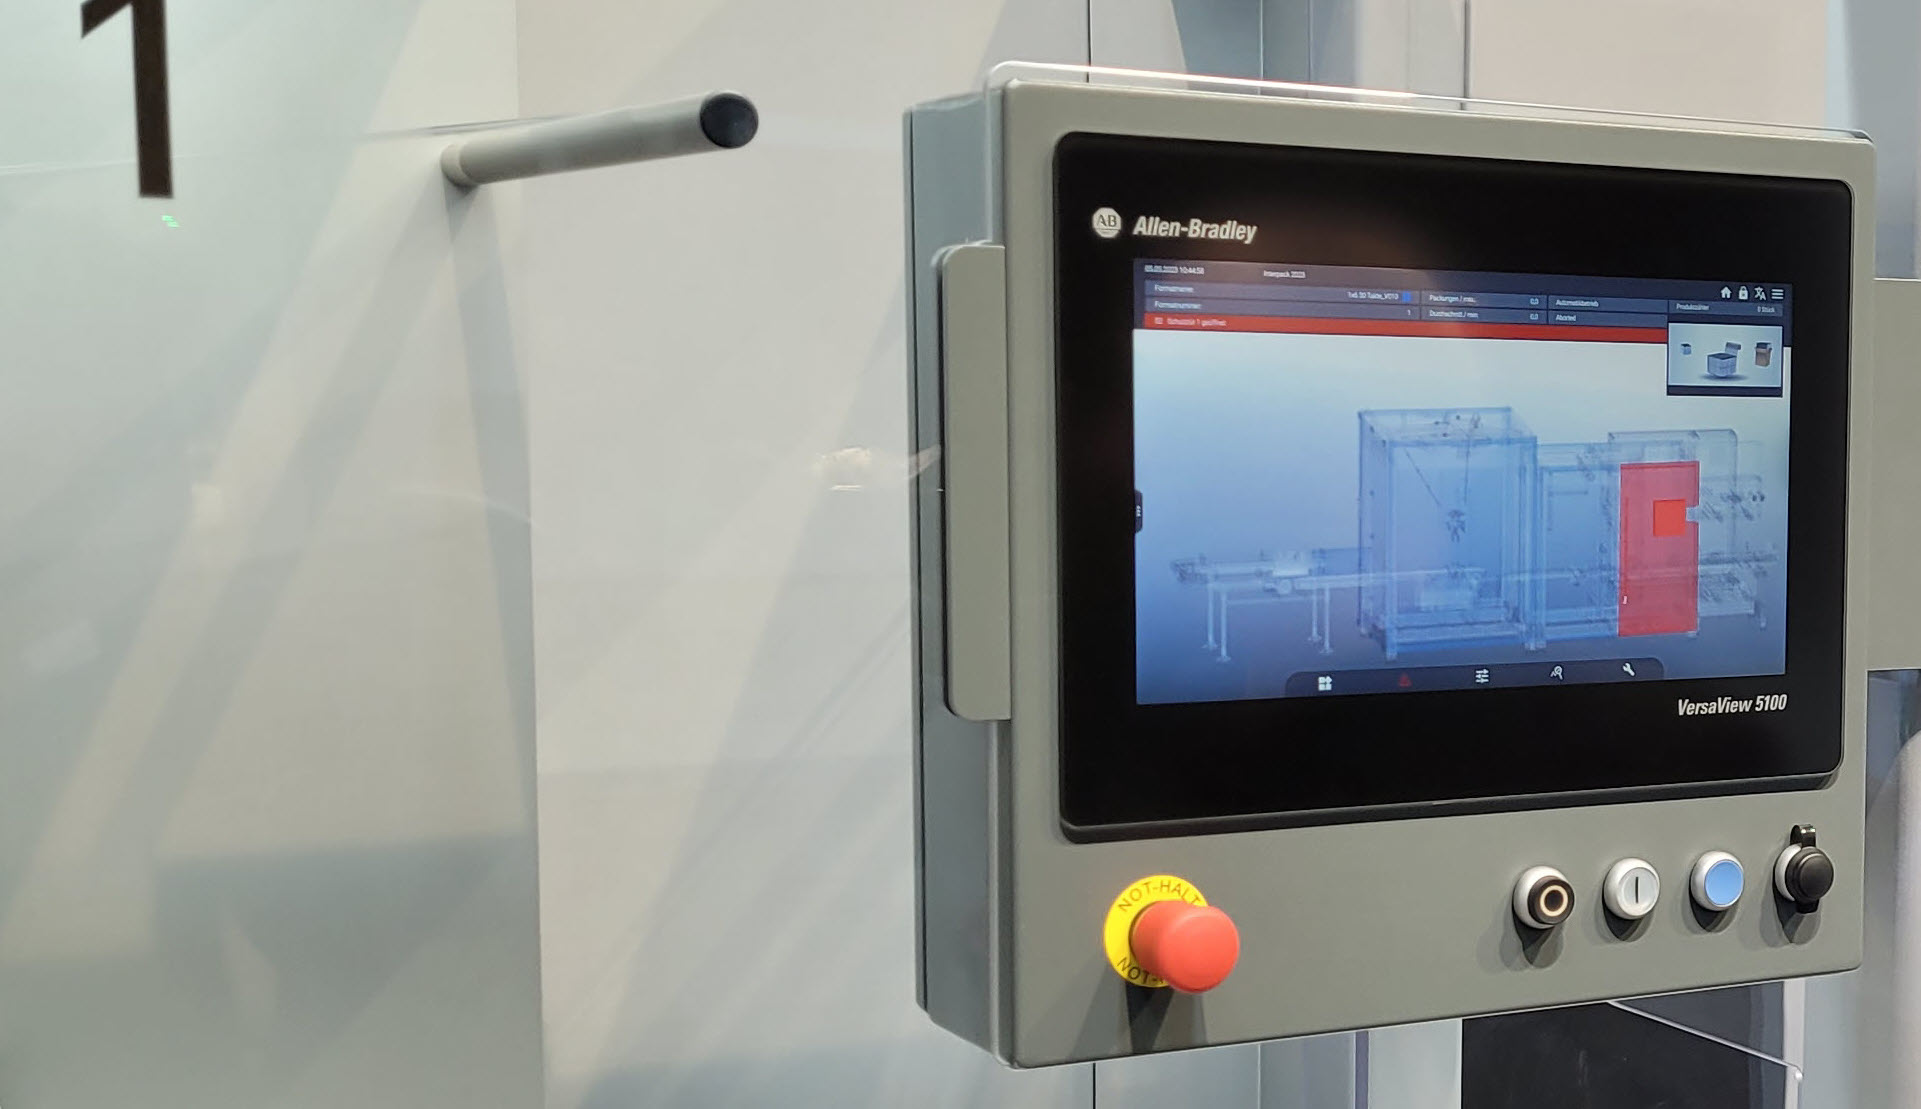 3DViewStation integrated with HMI